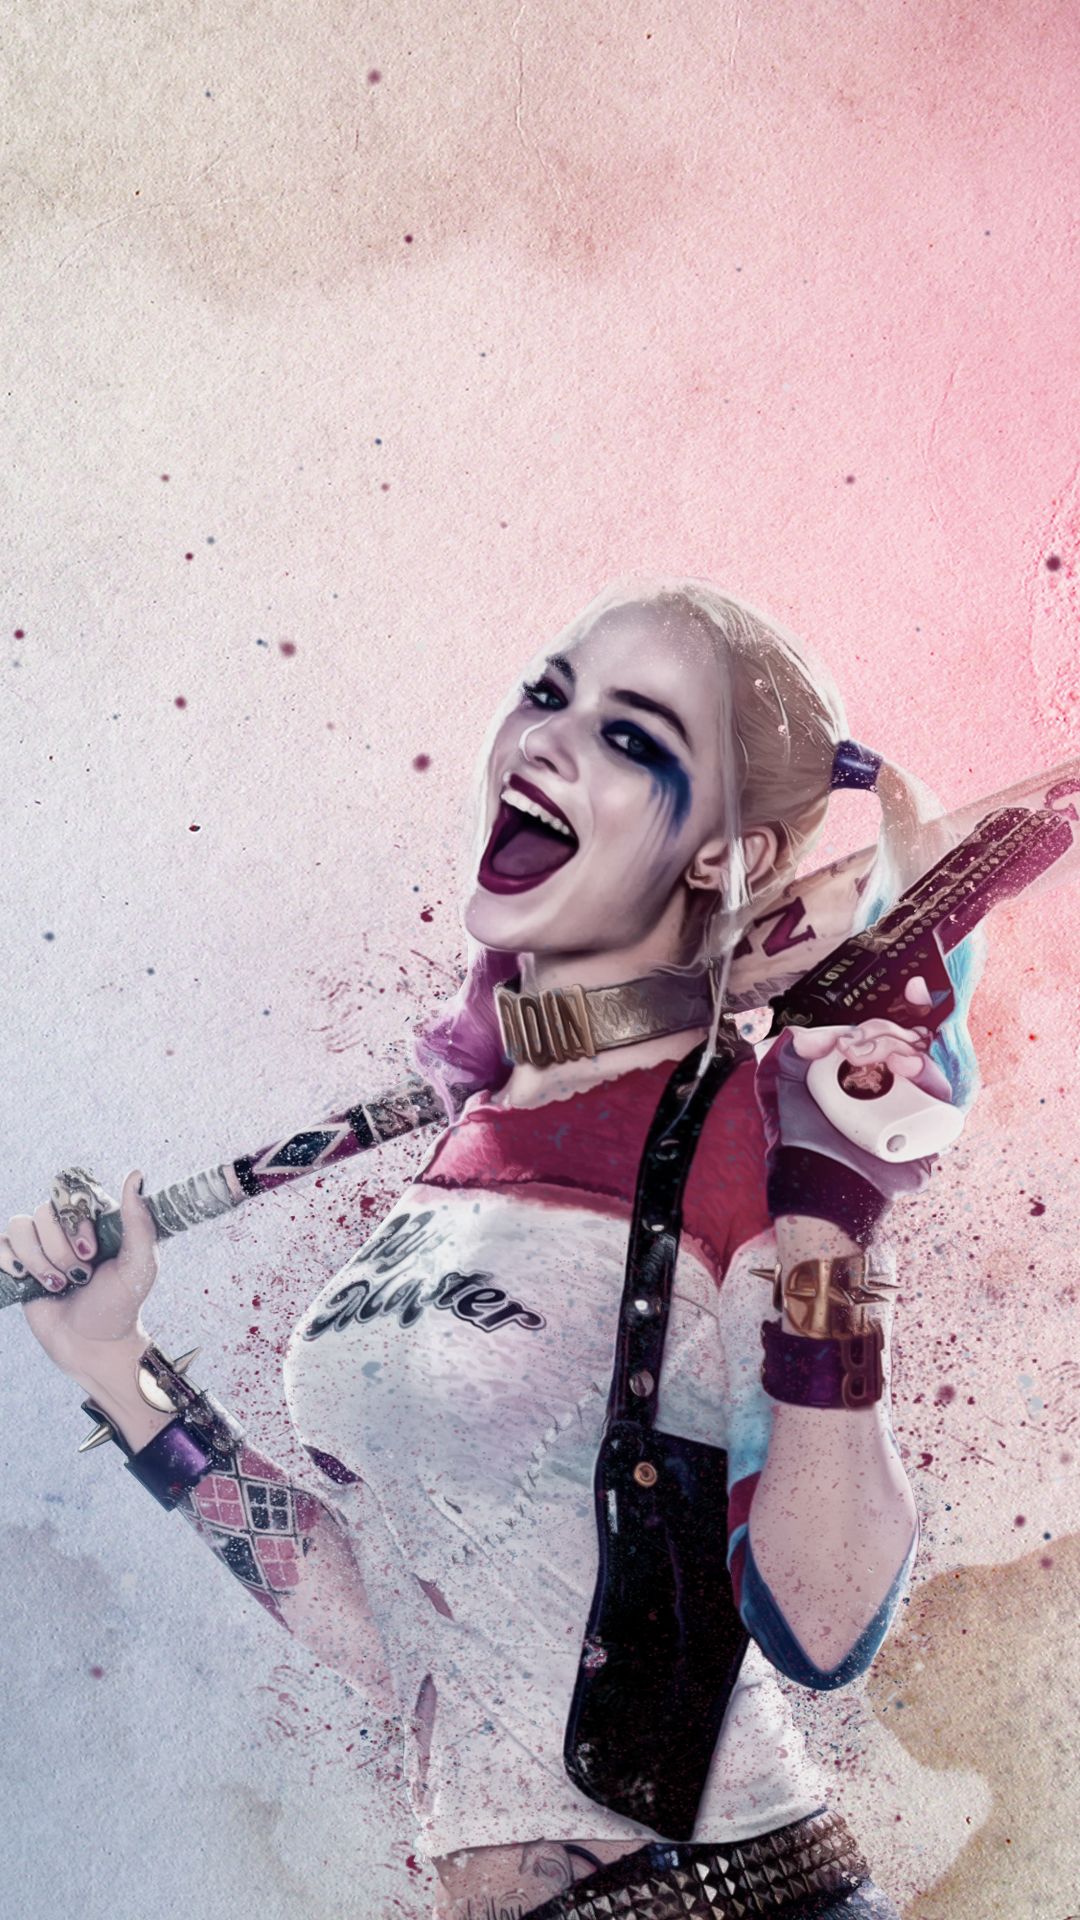 Suicide Squad Harley Quinn Android Wallpaper free download